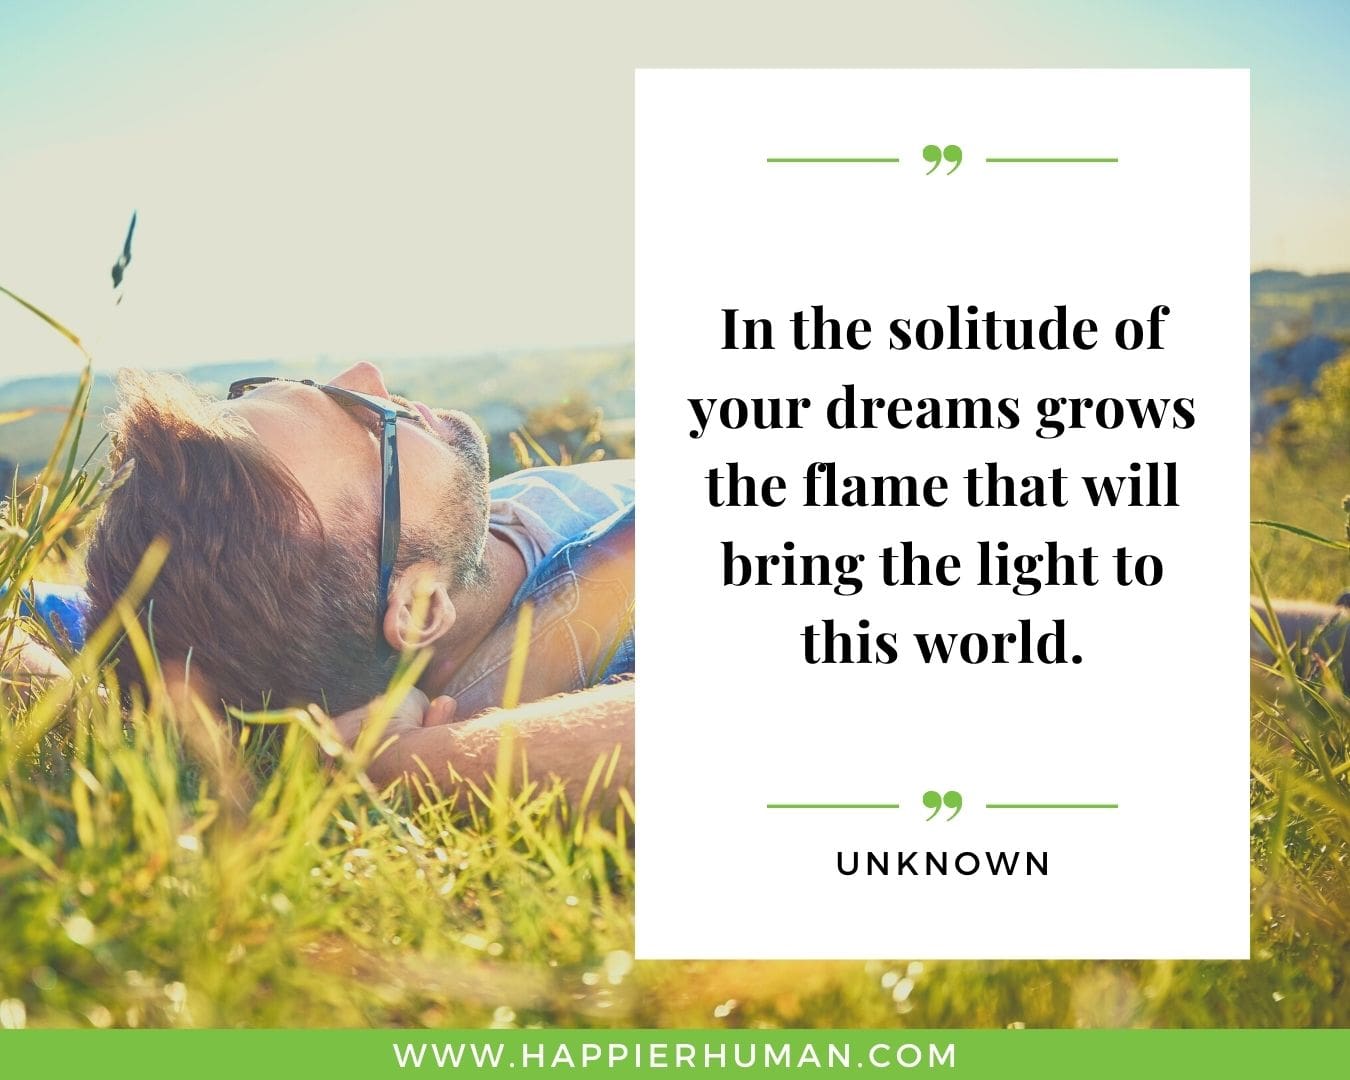 Loneliness Quotes - “In the solitude of your dreams grows the flame that will bring the light to this world.”– Unknown